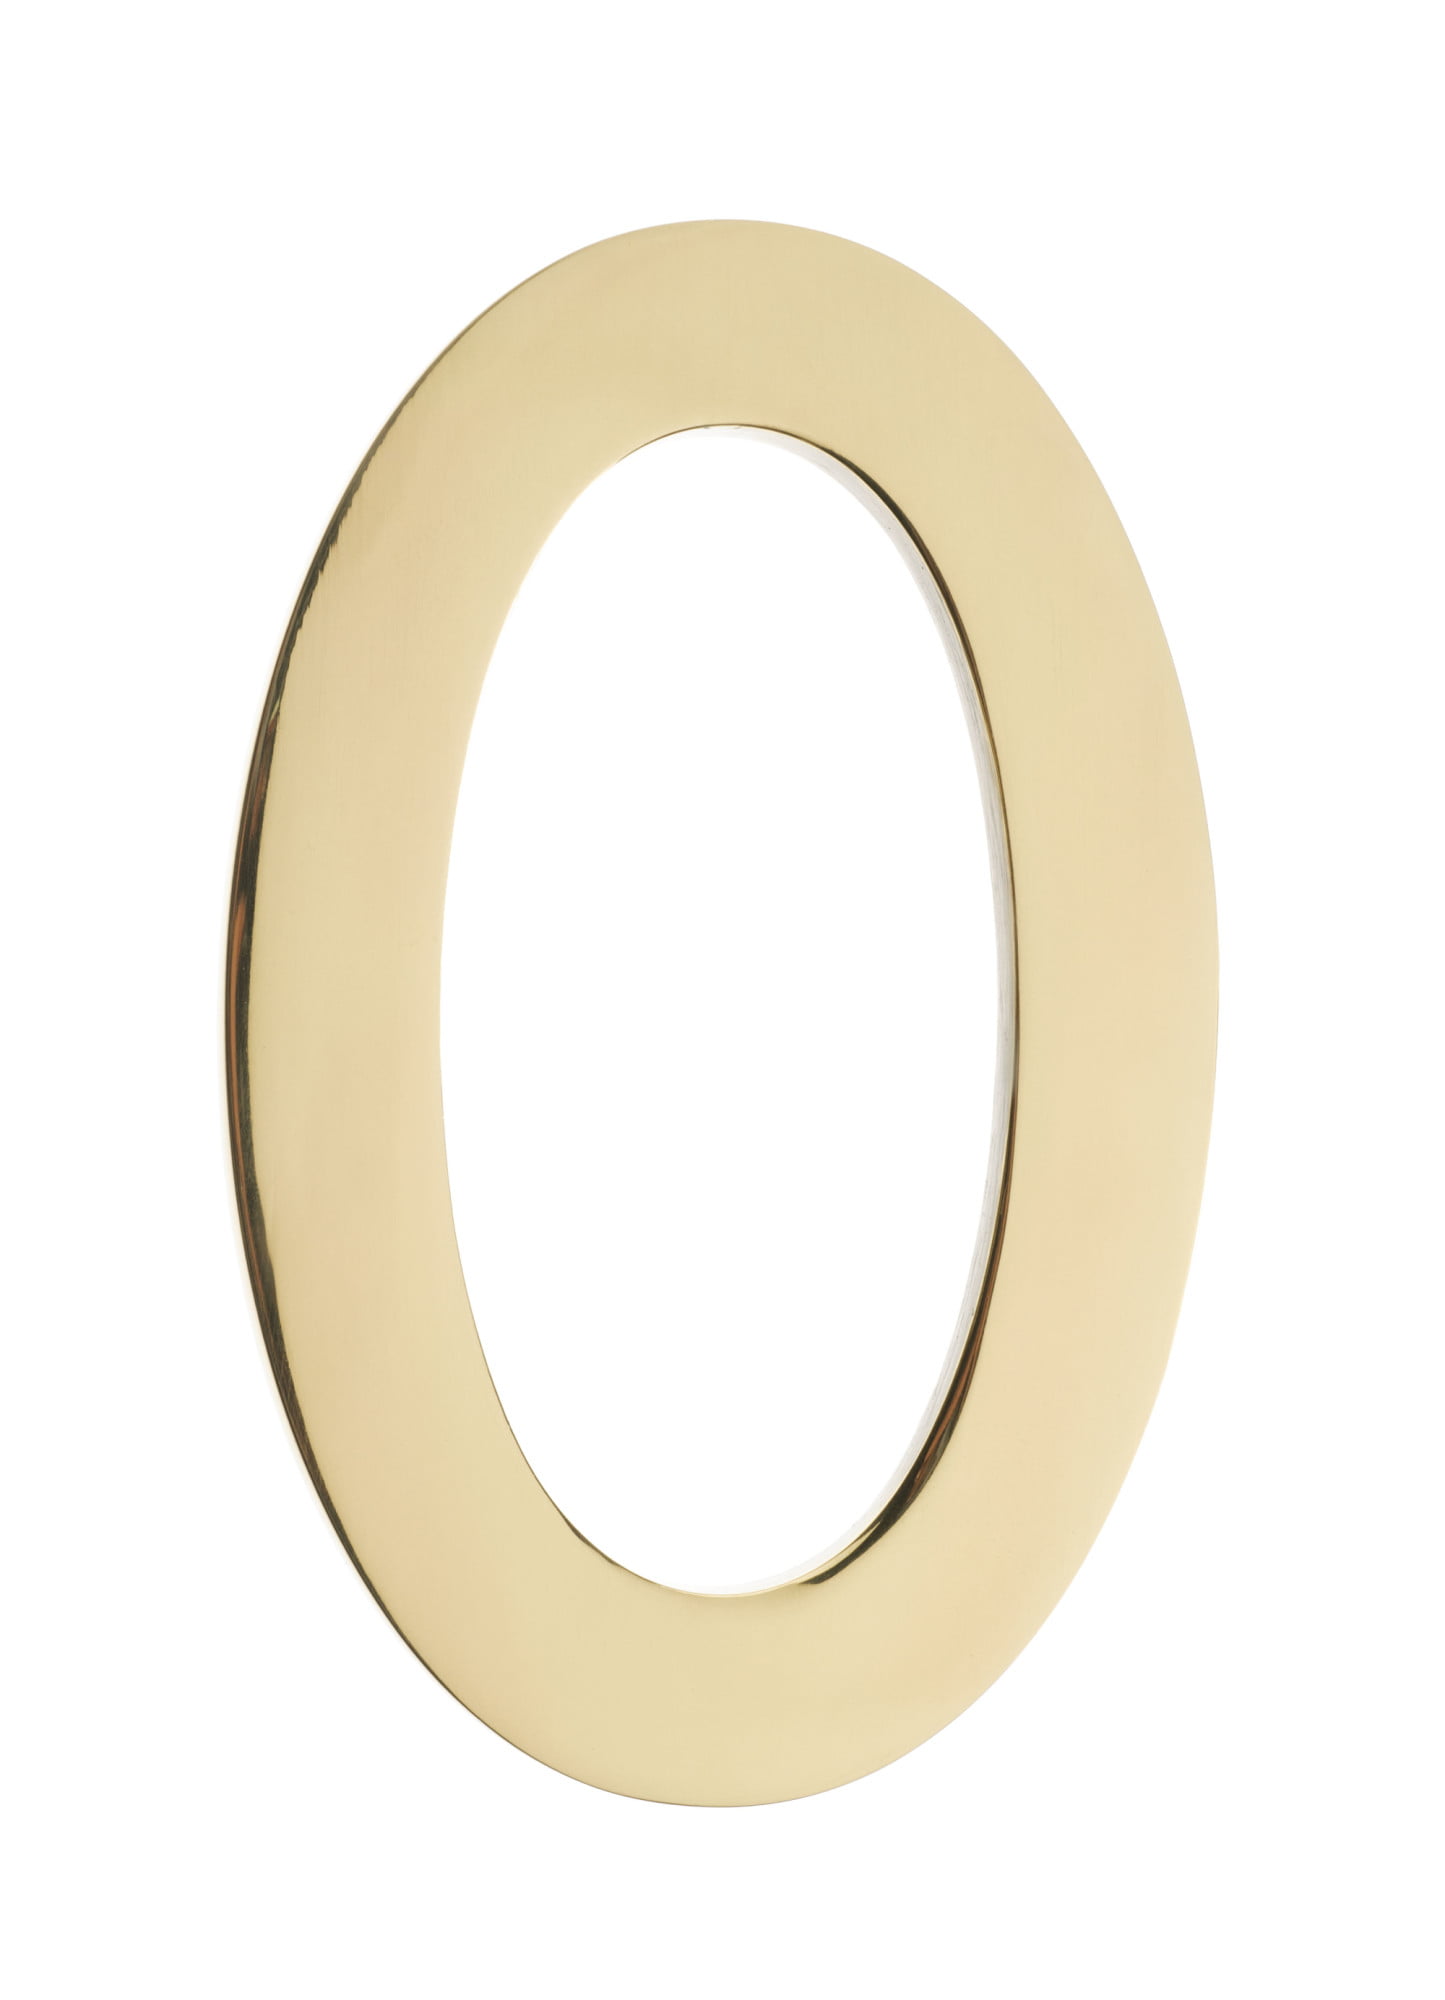 Floating House Number 0, Polished Brass - 4 In.